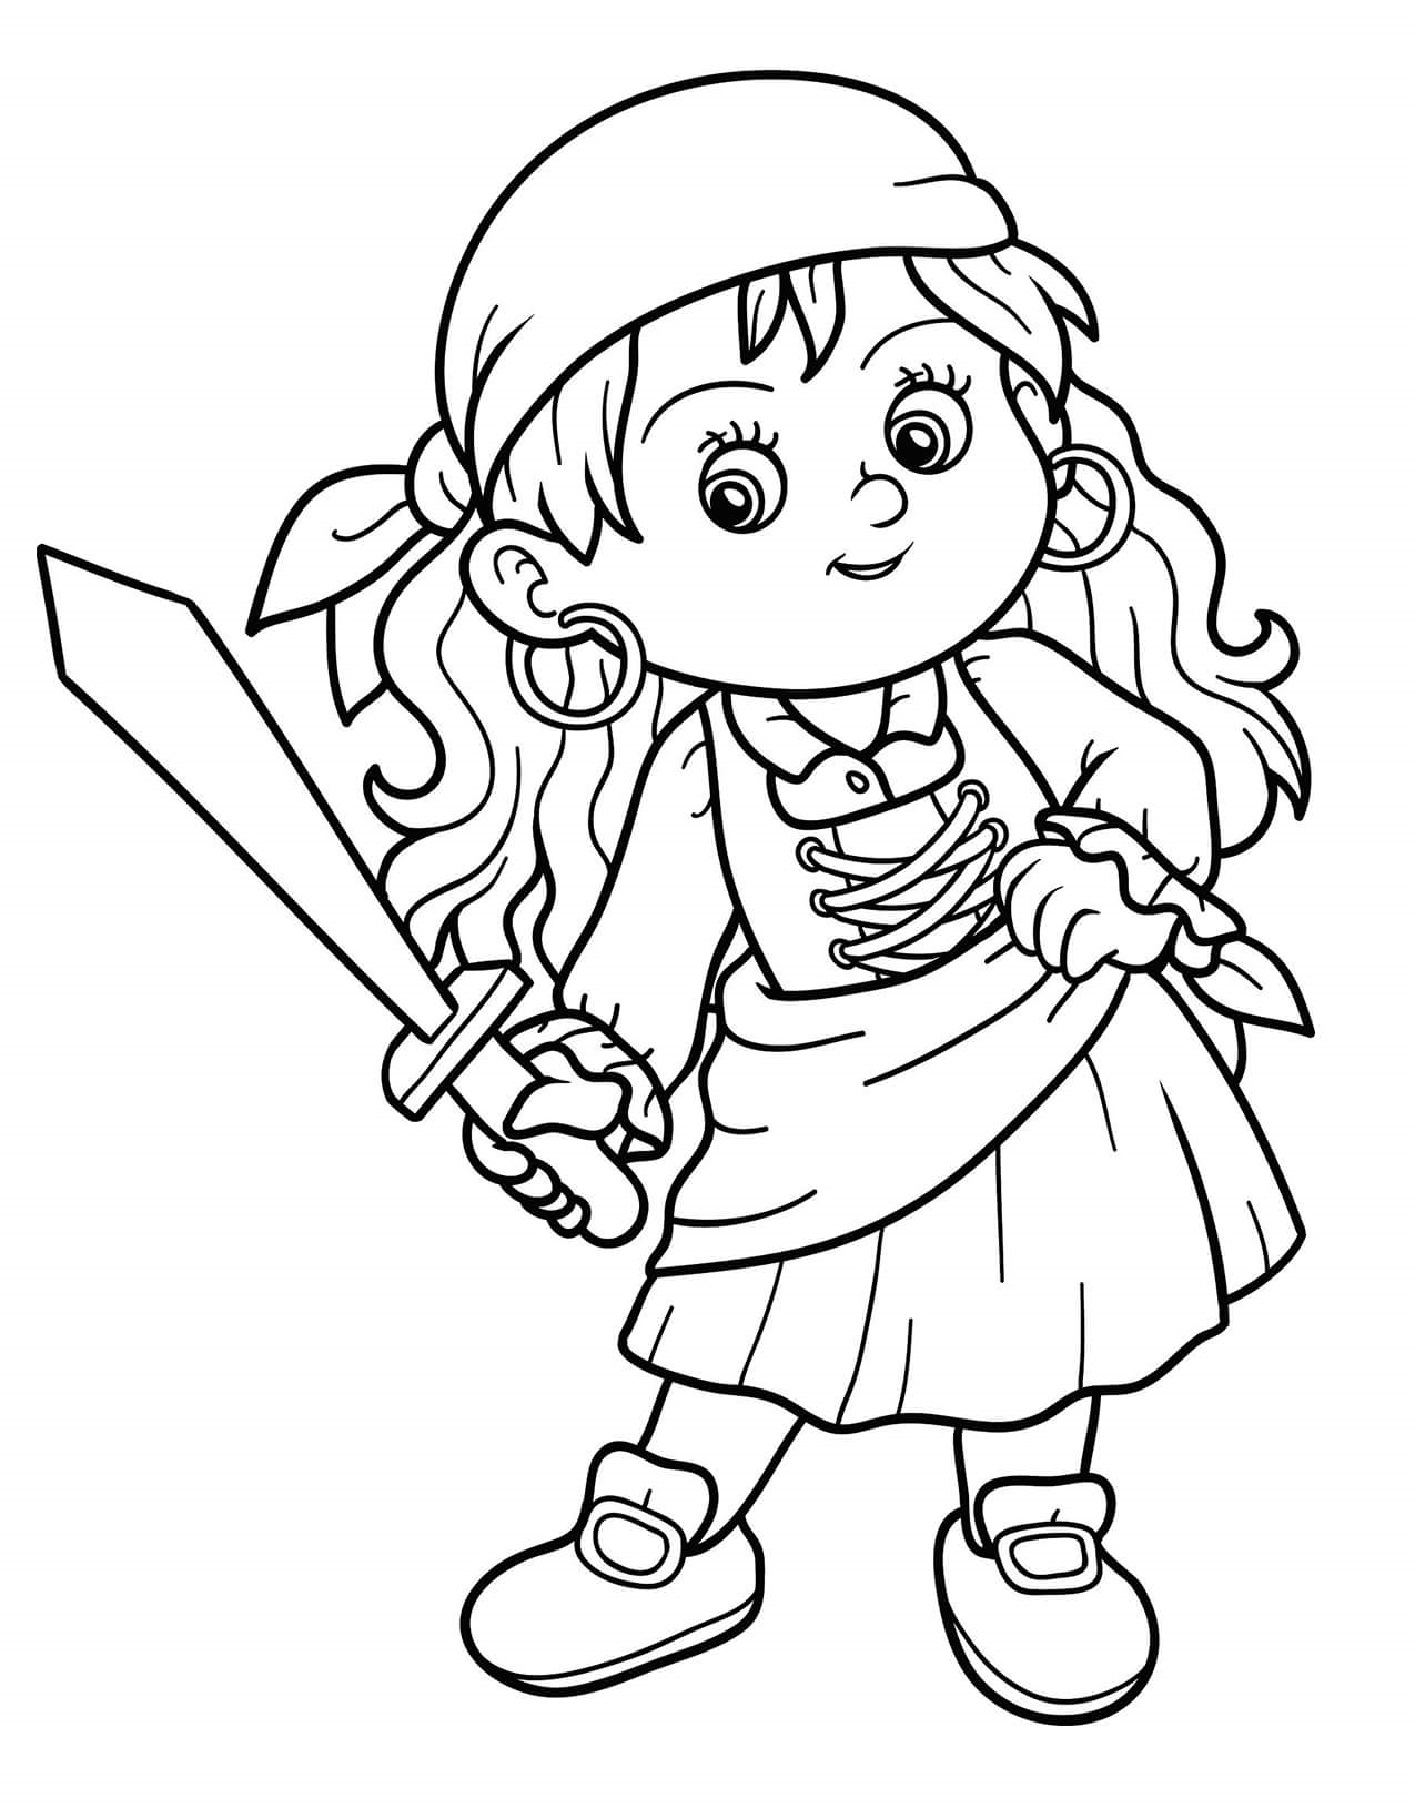 Girl Pirate Coloring Pages for kids - SheetalColor.com